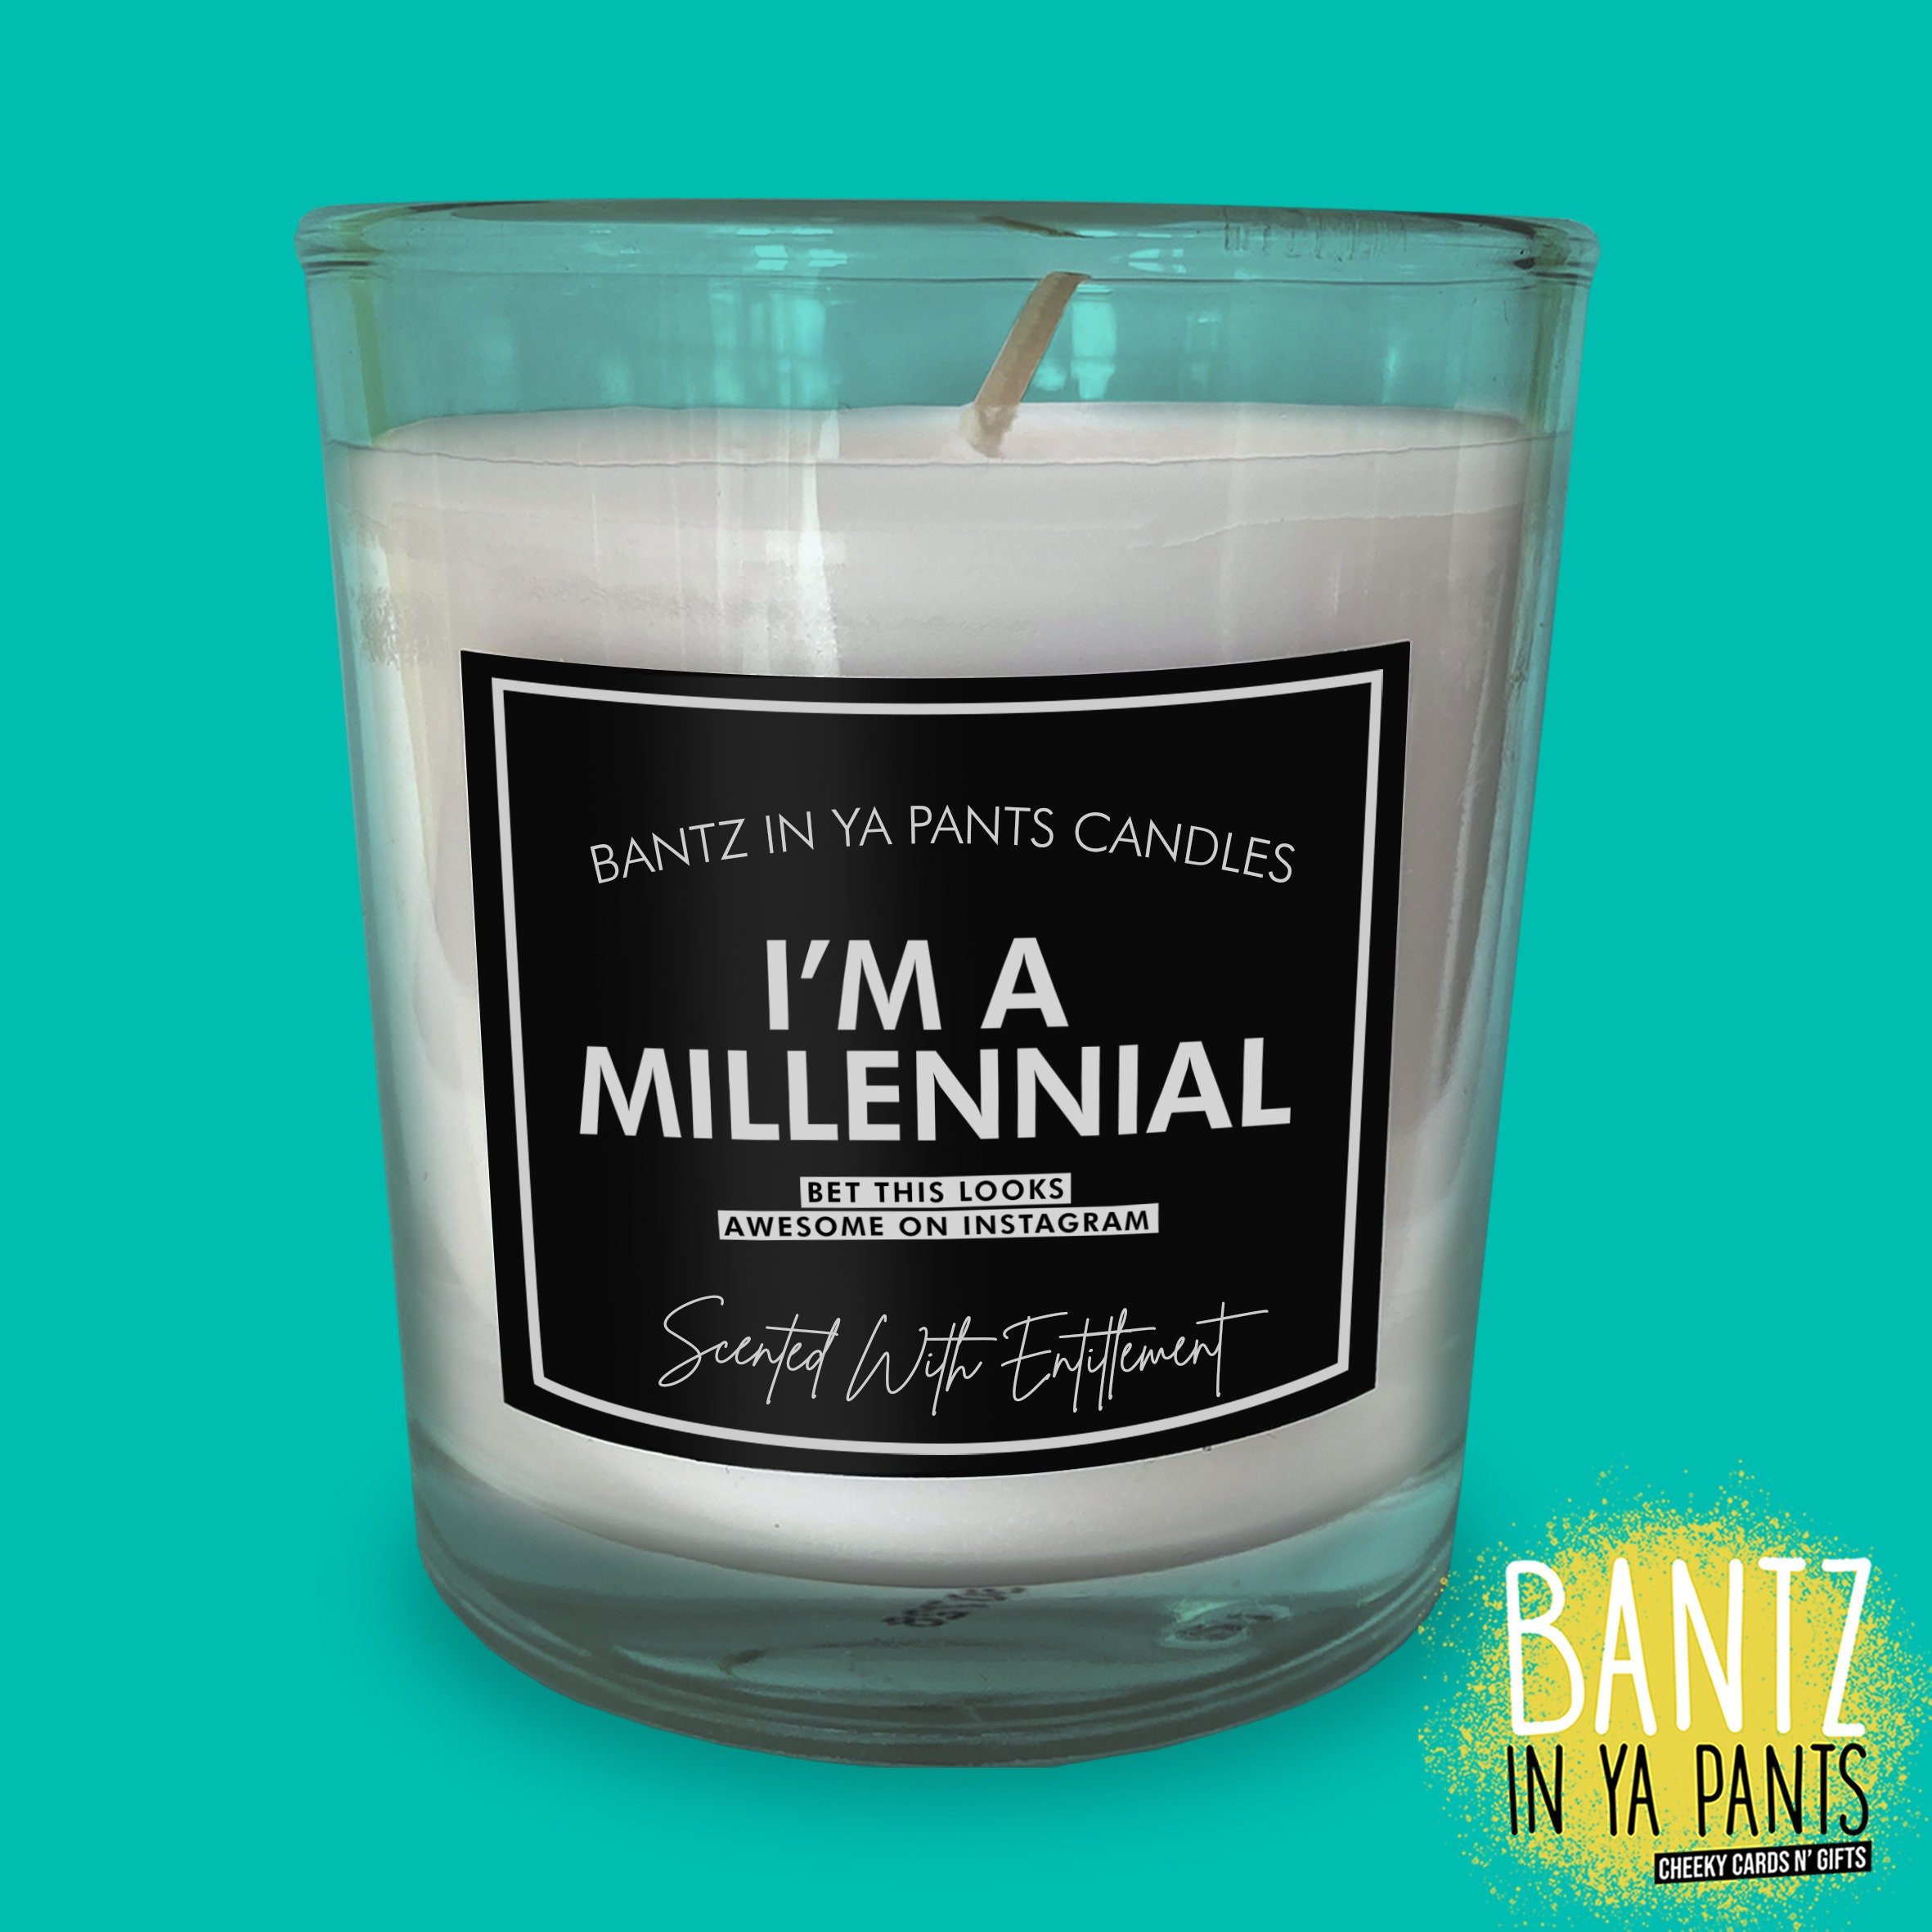 Milenials Gifts & Merchandise for Sale